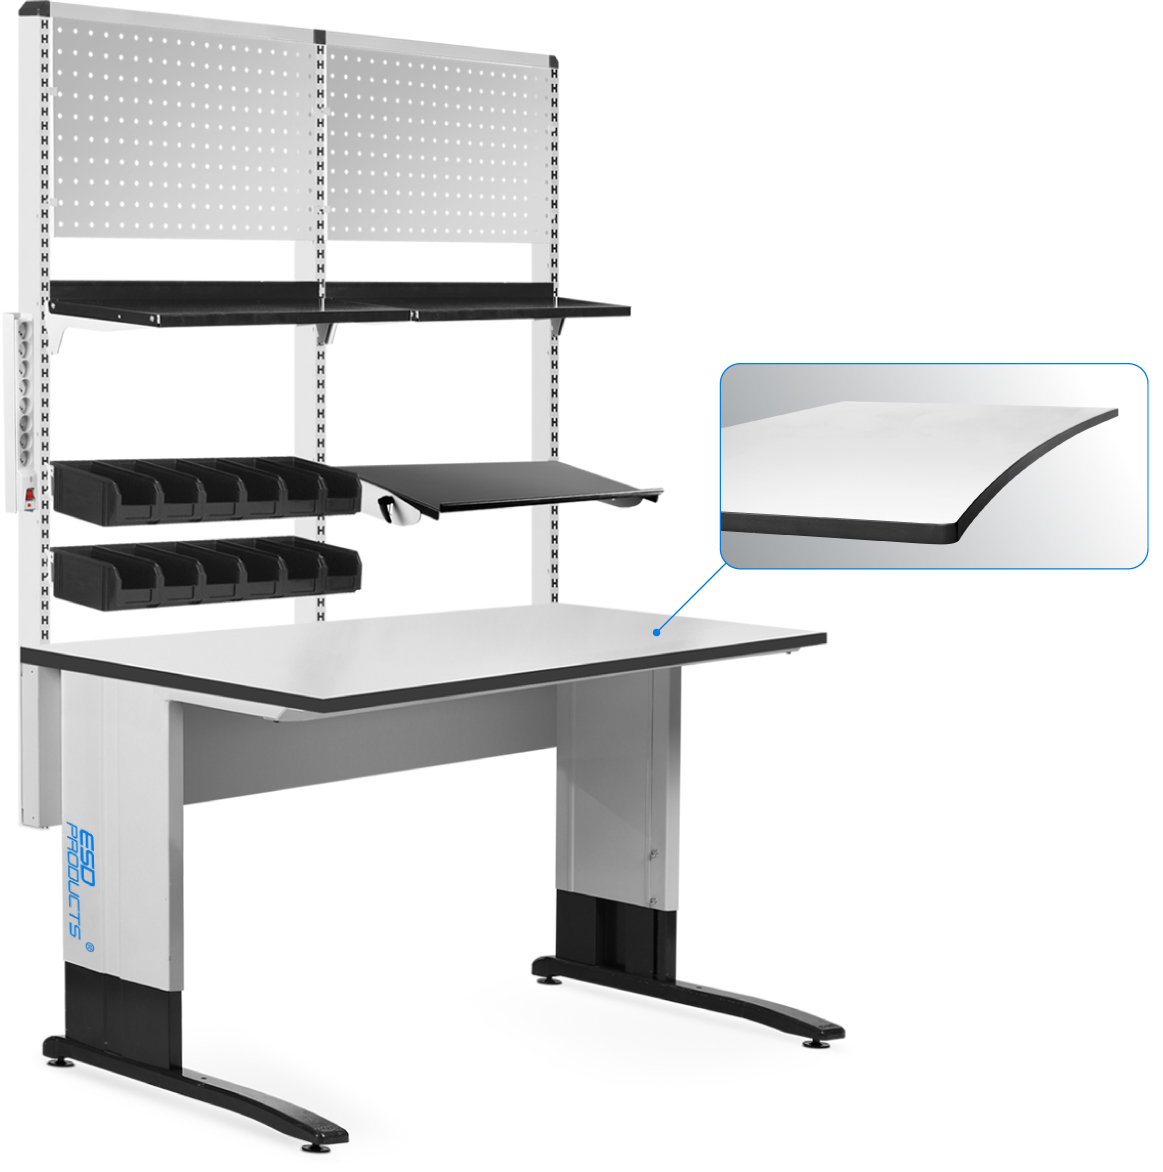 ESD-Worktable-Premium-Ergonomic-Table-Top-Reeco-Ischa-1830-x-800-mm-ESD-Products-AES